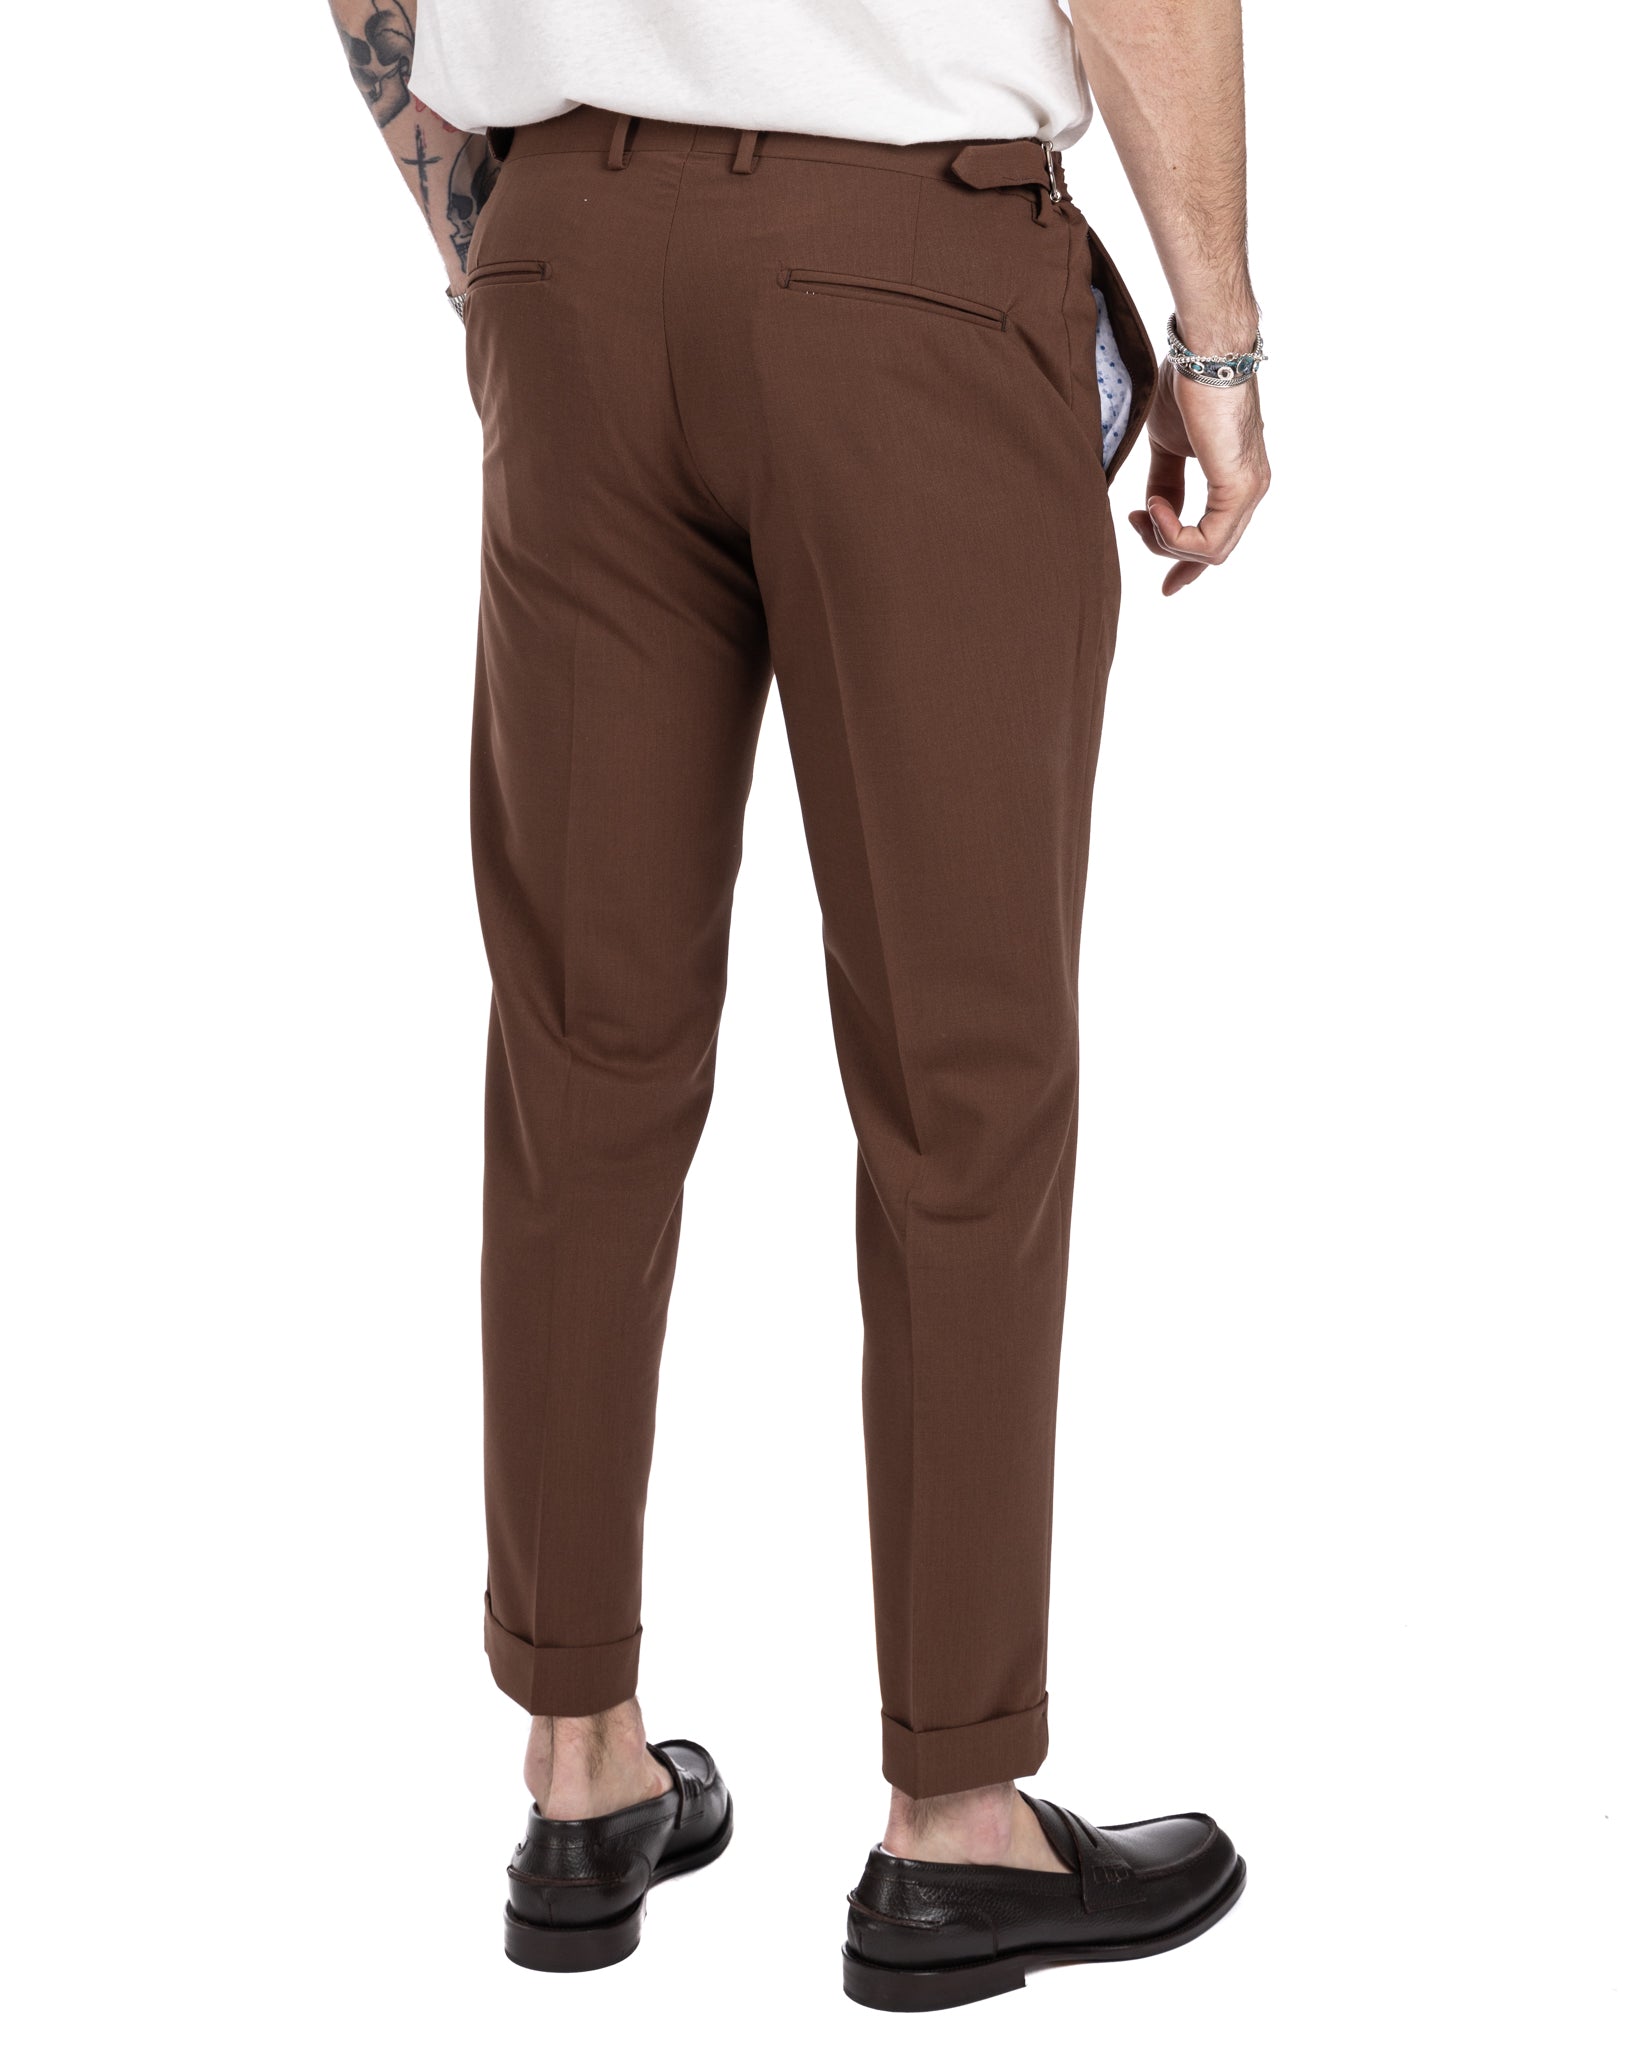 Trani - trousers with dark brown buckles